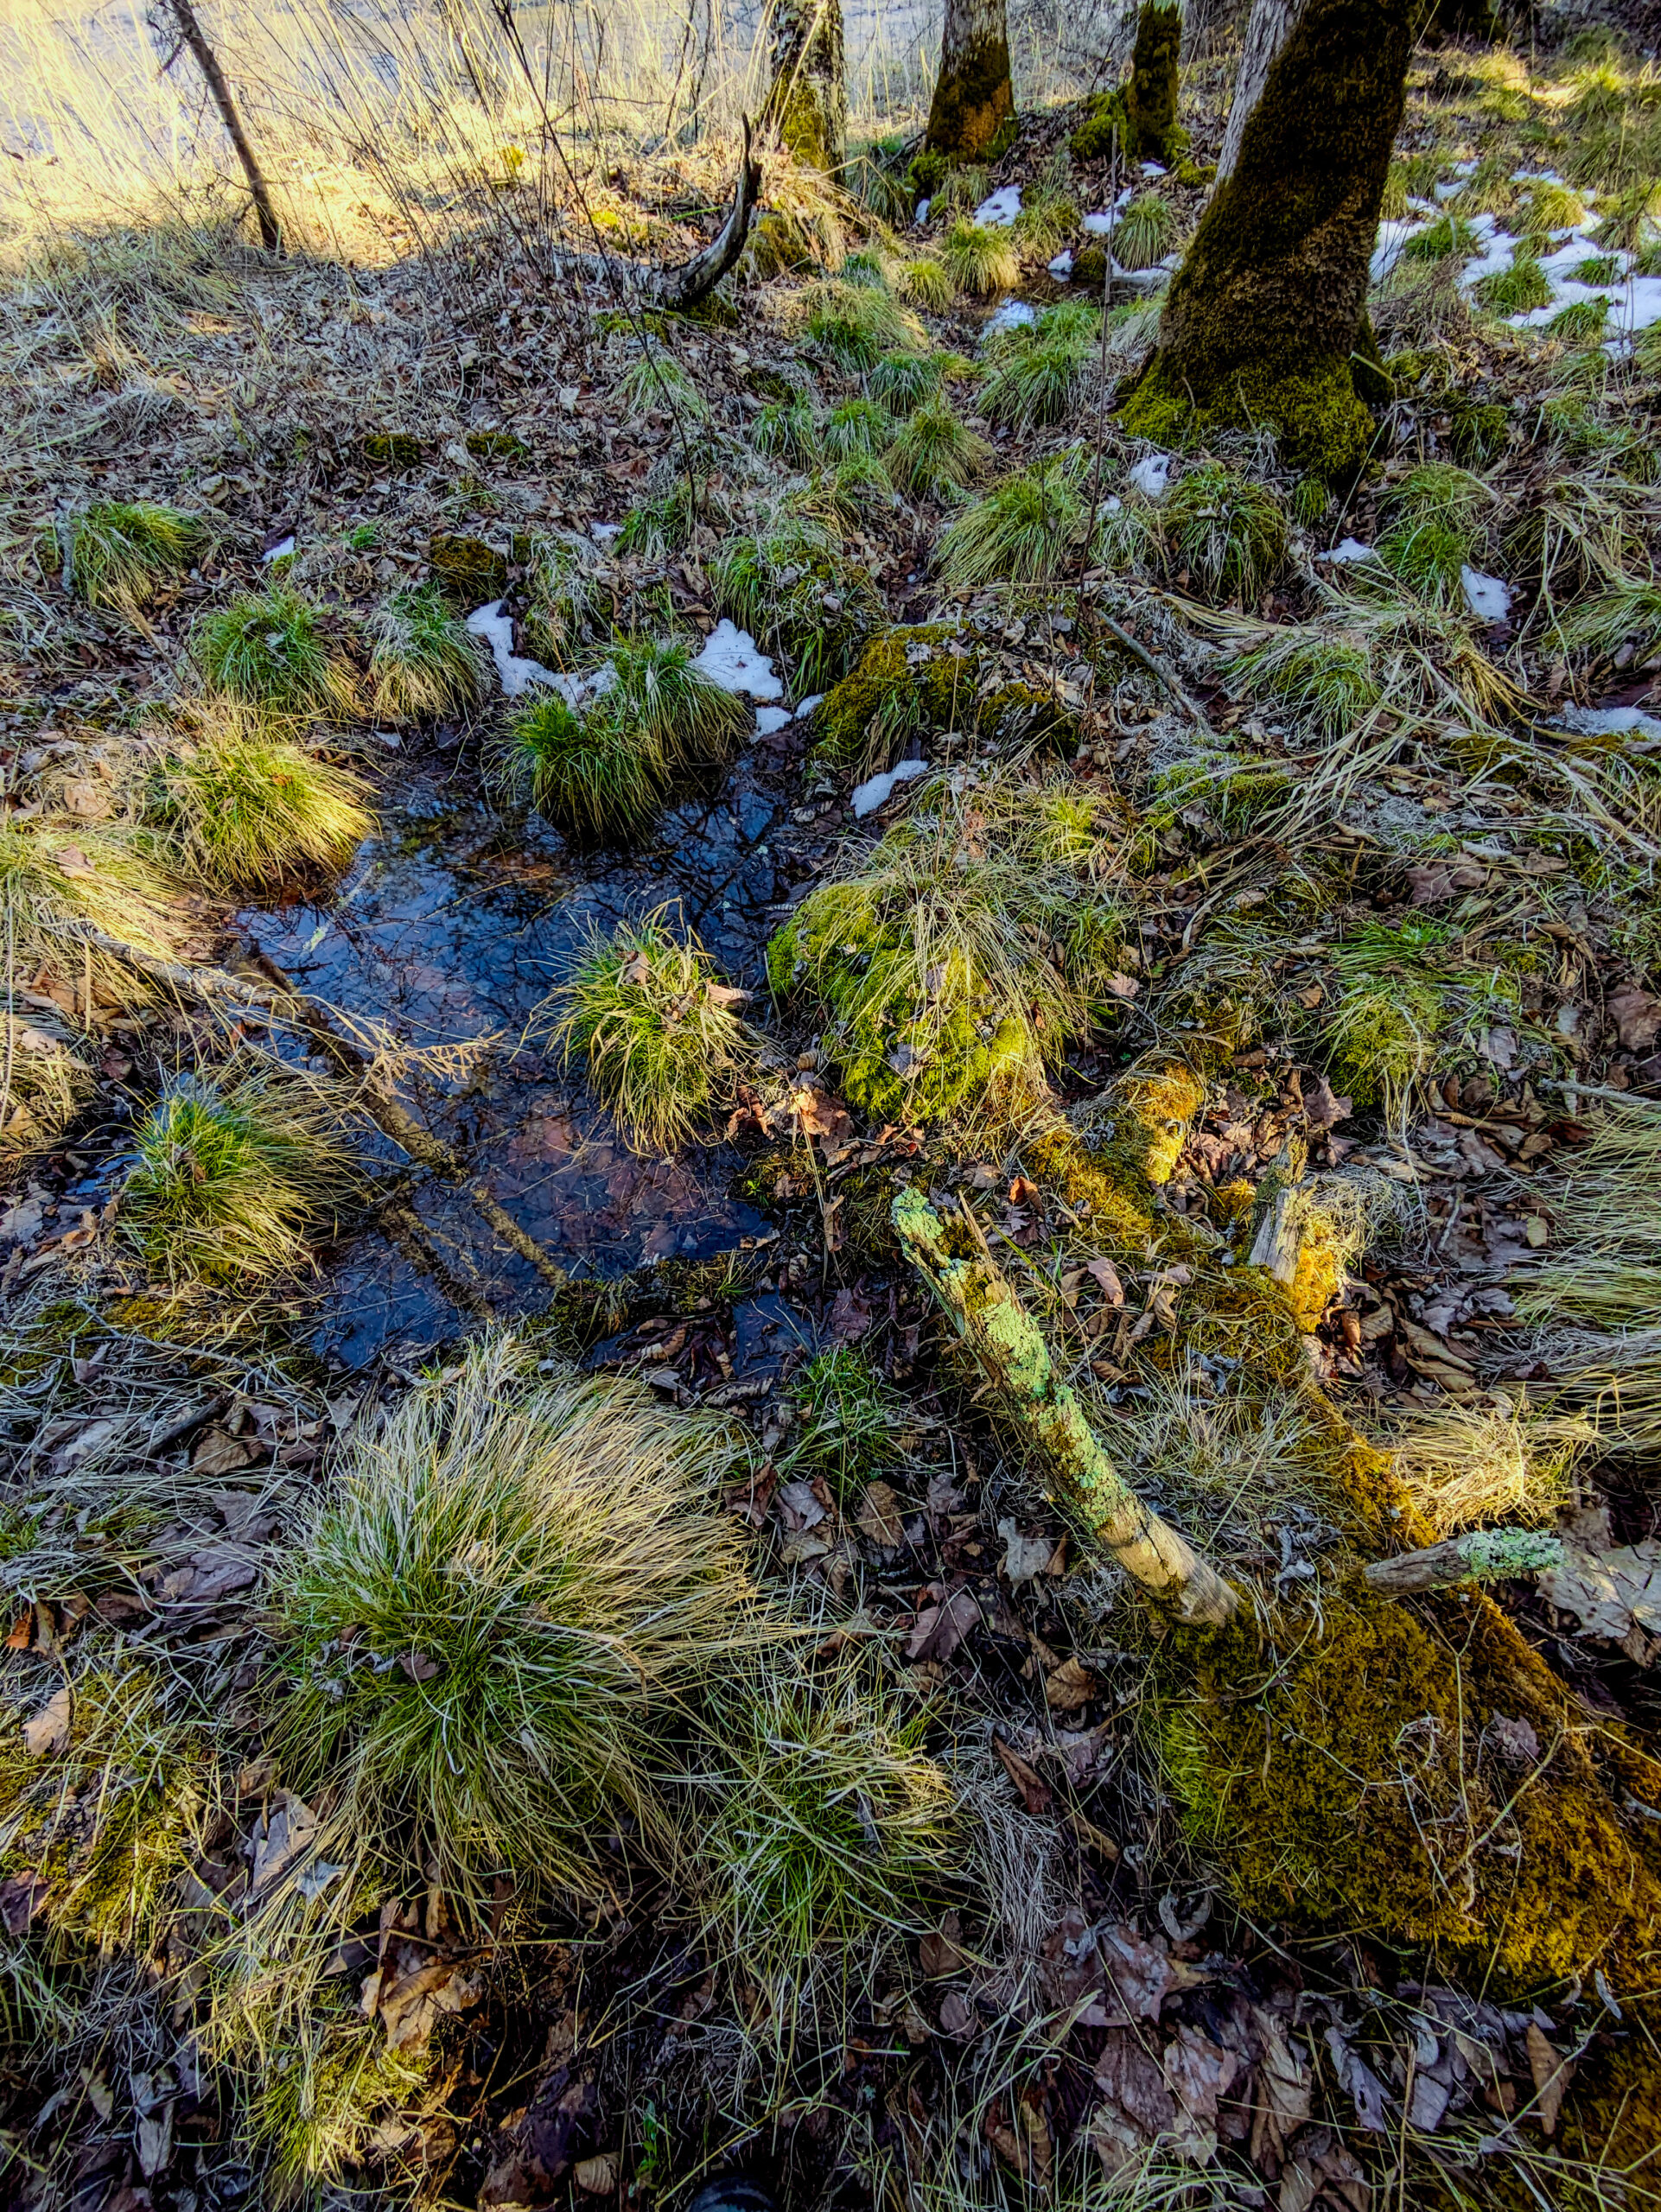 Bog, moss, tufts of grass surround a small pool of snow melt in the woods.  Small clumps of snow still remain, but are not long for this world.